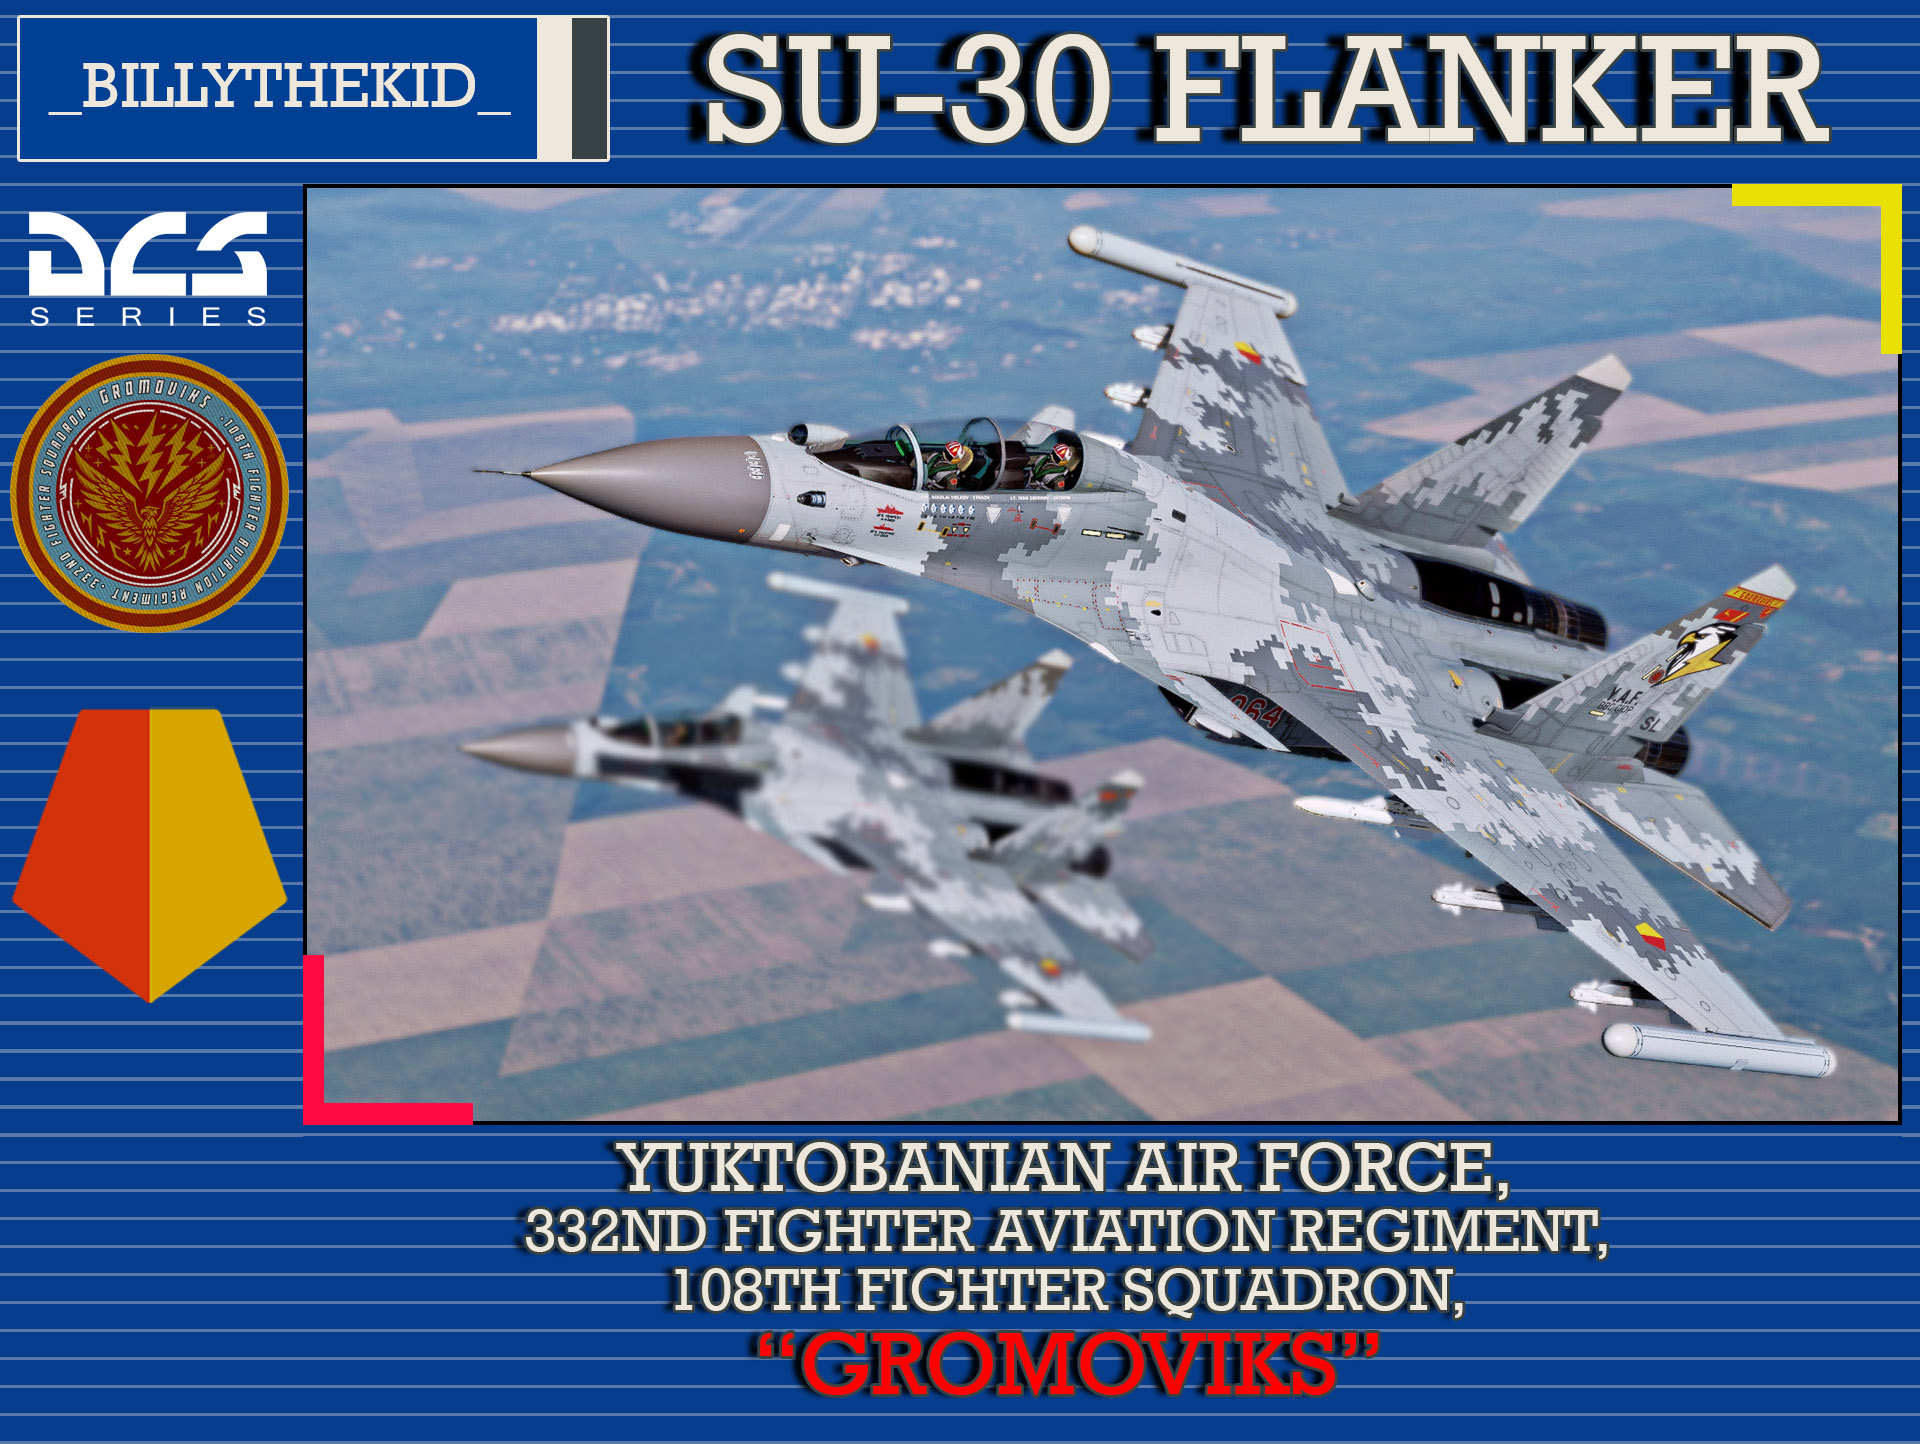 Ace Combat - Yuktobanian Air Force - 108th Fighter Aviation Regiment - 332nd Fighter Squadron "Gromoviks"